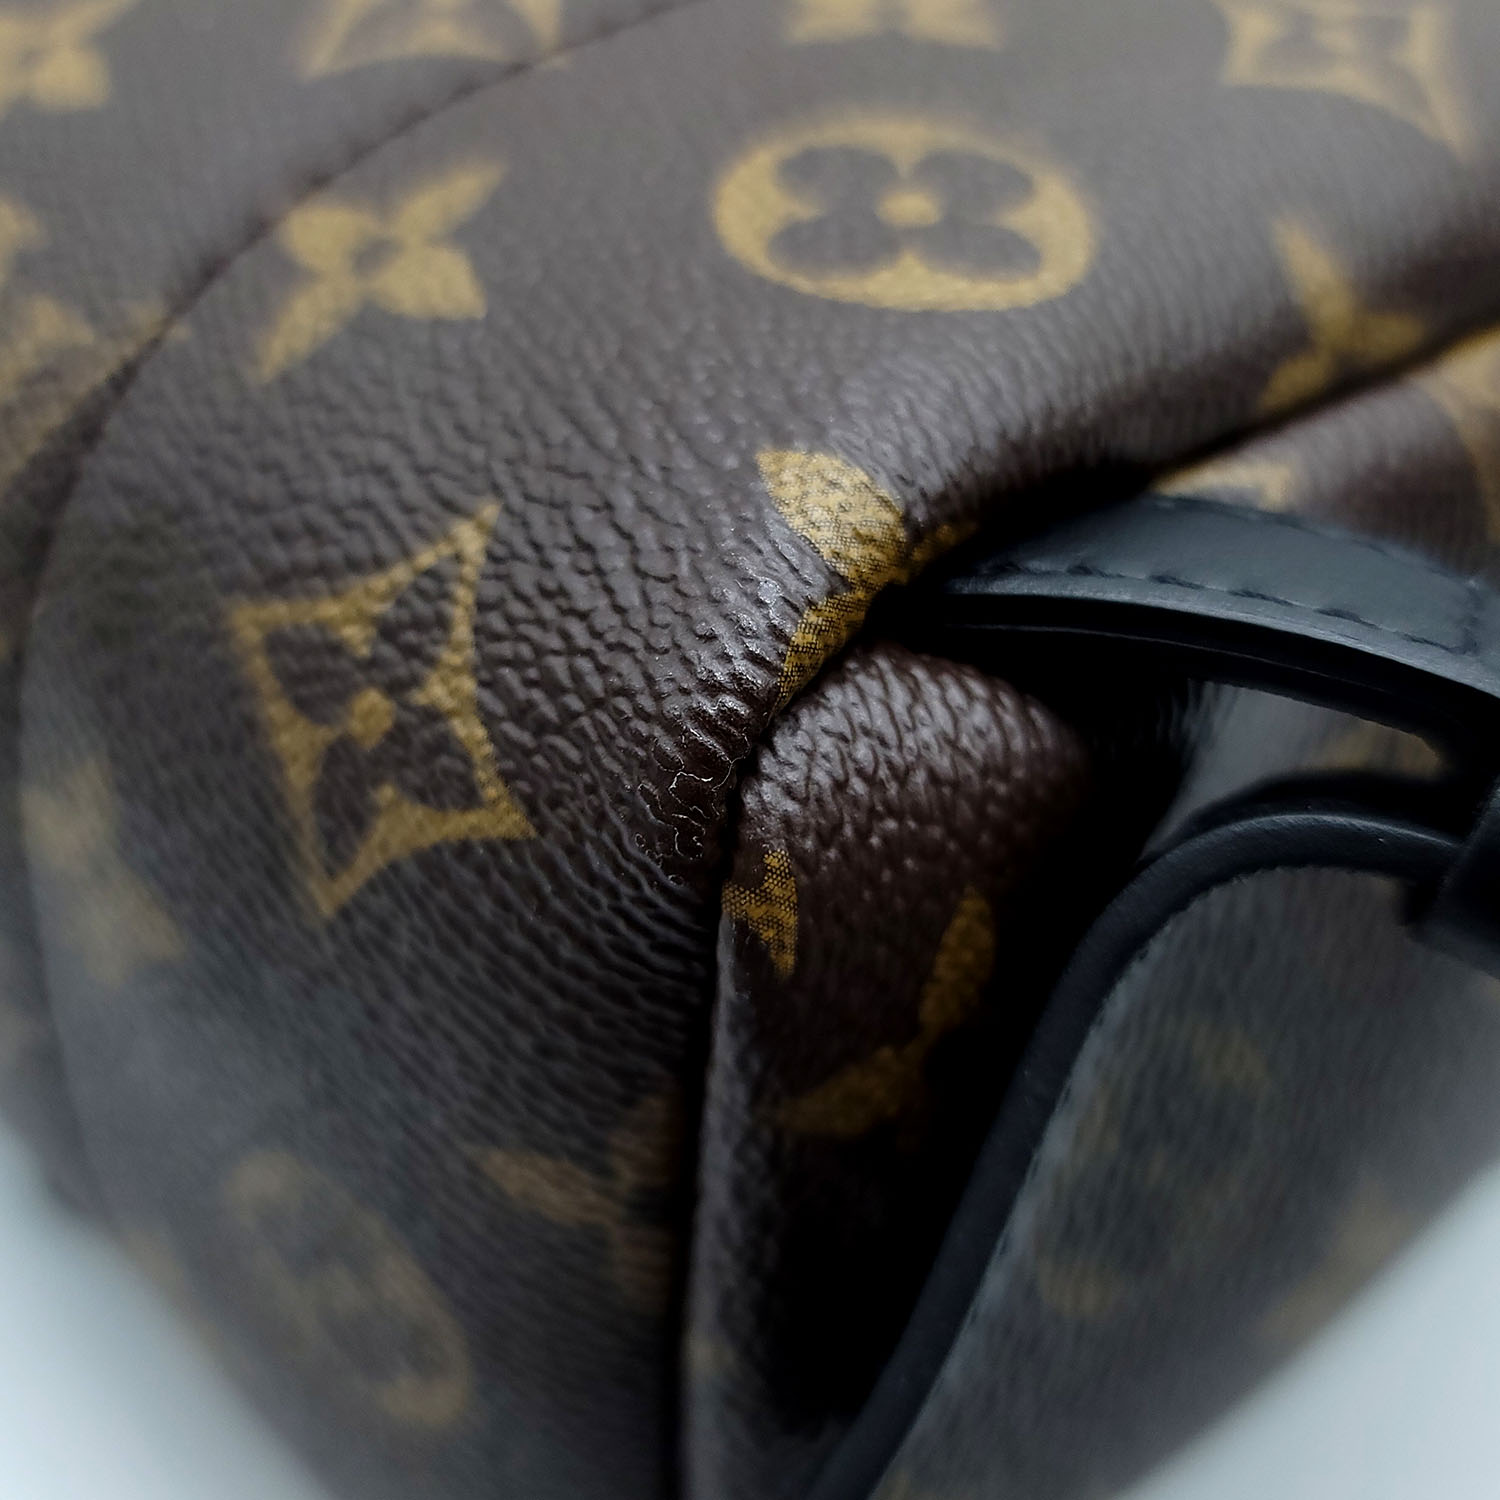 Louis-Vuitton-Monogram-Palm-Springs-PM-Ruck-Sack-Back-Pack-M43116 –  dct-ep_vintage luxury Store